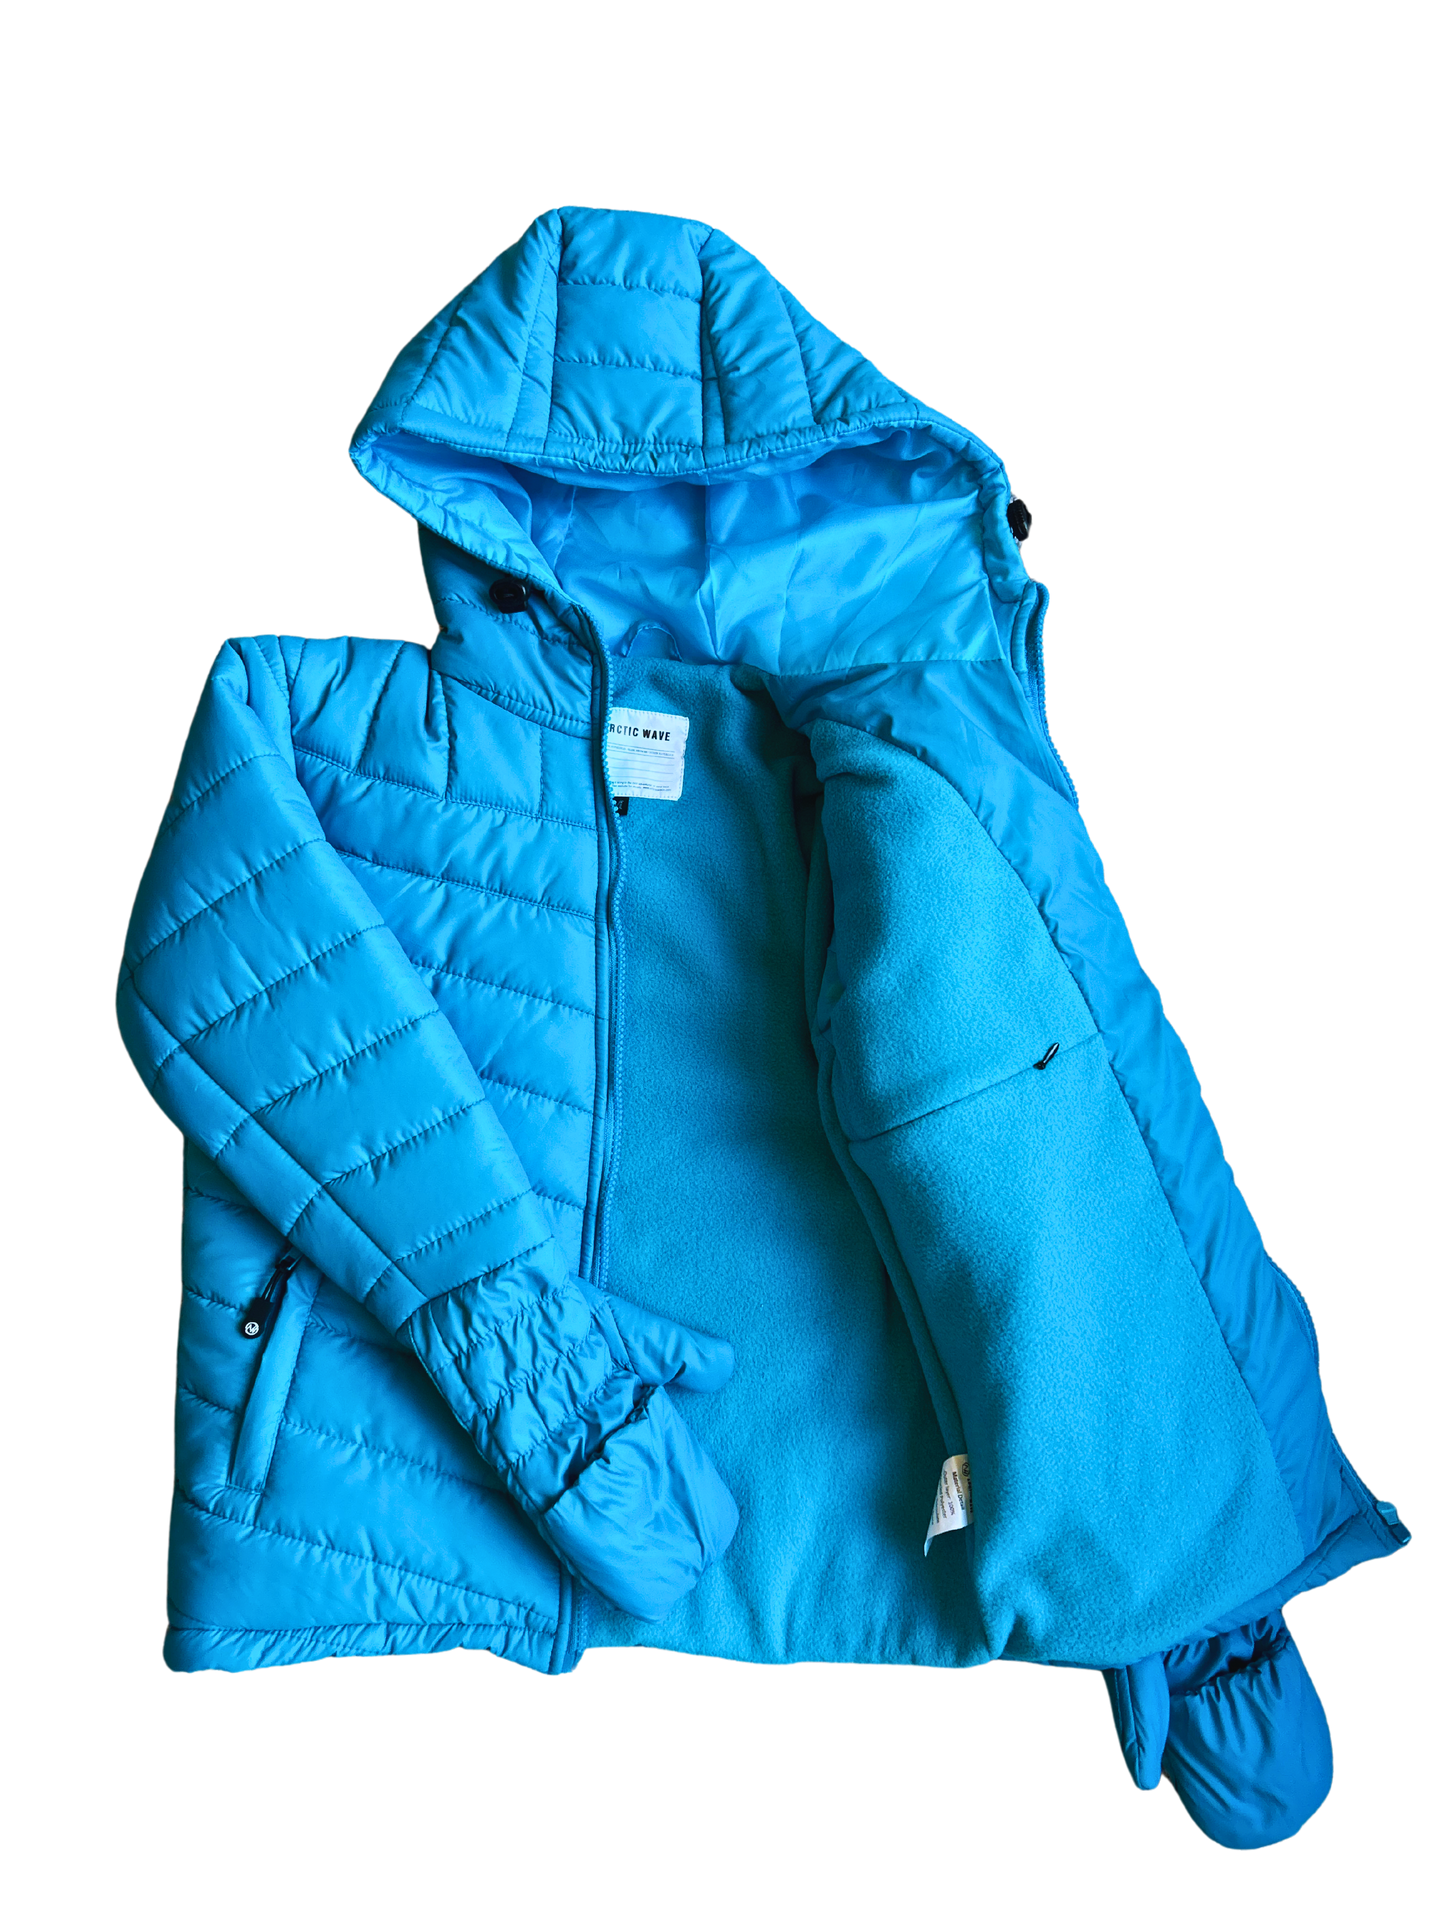 Puffer coat, puffer jacket, children's winter coat, attached mittens, attached gloves, built-in mittens, builtin mittens, built in mittens, built-in gloves, builtin gloves, built in gloves, adaptive coat, special needs coat, unisex, fleece lining, recycled shell, rpet, warm, zip up jacket, unisex, fleece lining, warm coat, recycled shell, rpet, girls winter coat, girls puffer jacket, best kids jackets, jacket with attached gloves